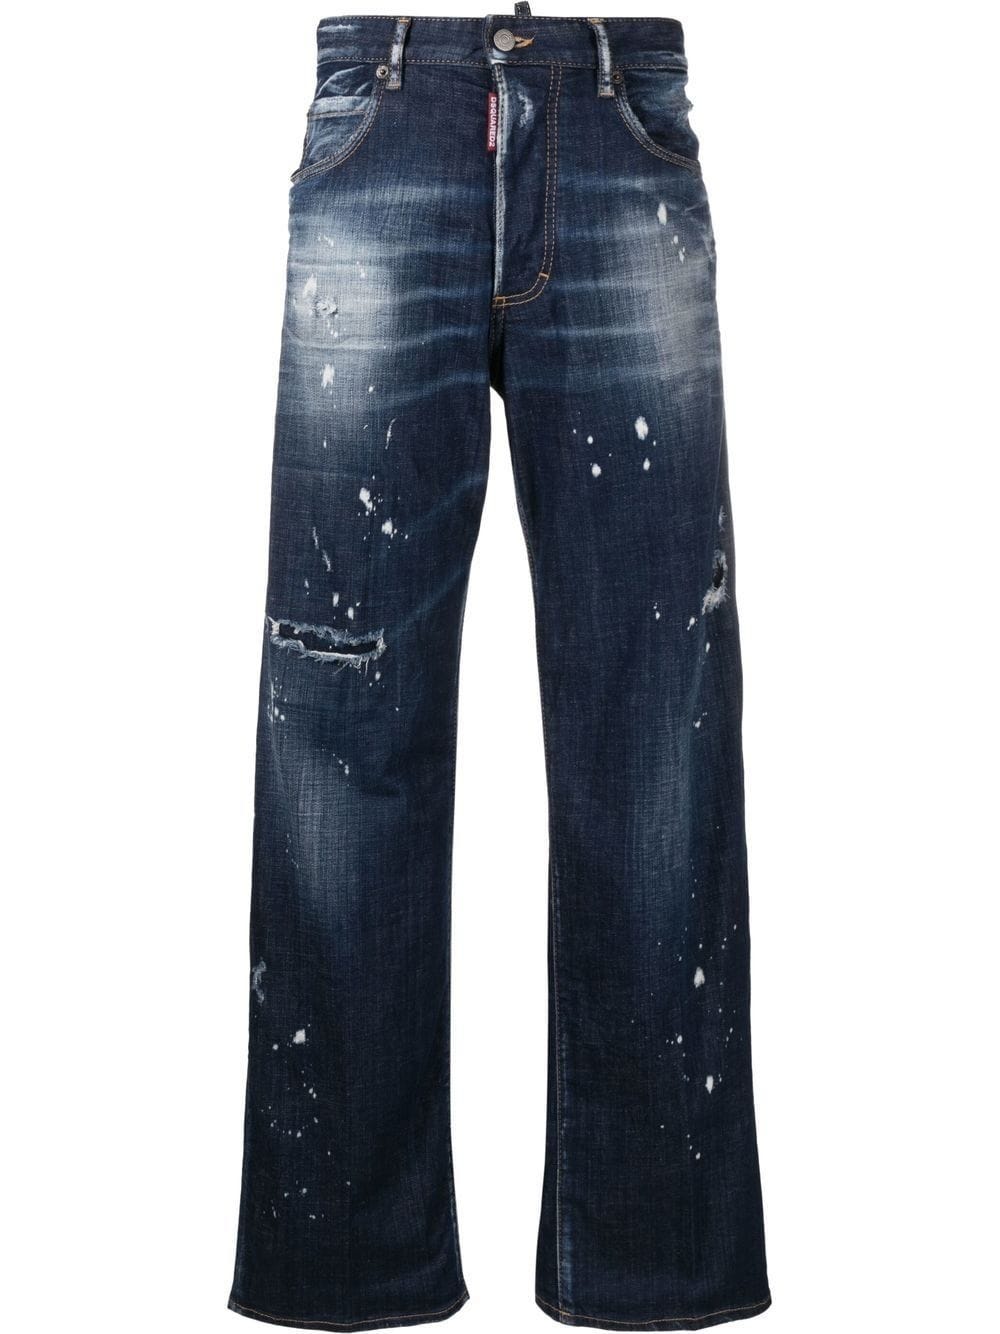 DSQUARED2 DARK BLUE STRAIGHT JEANS WITH WORN EFFECT